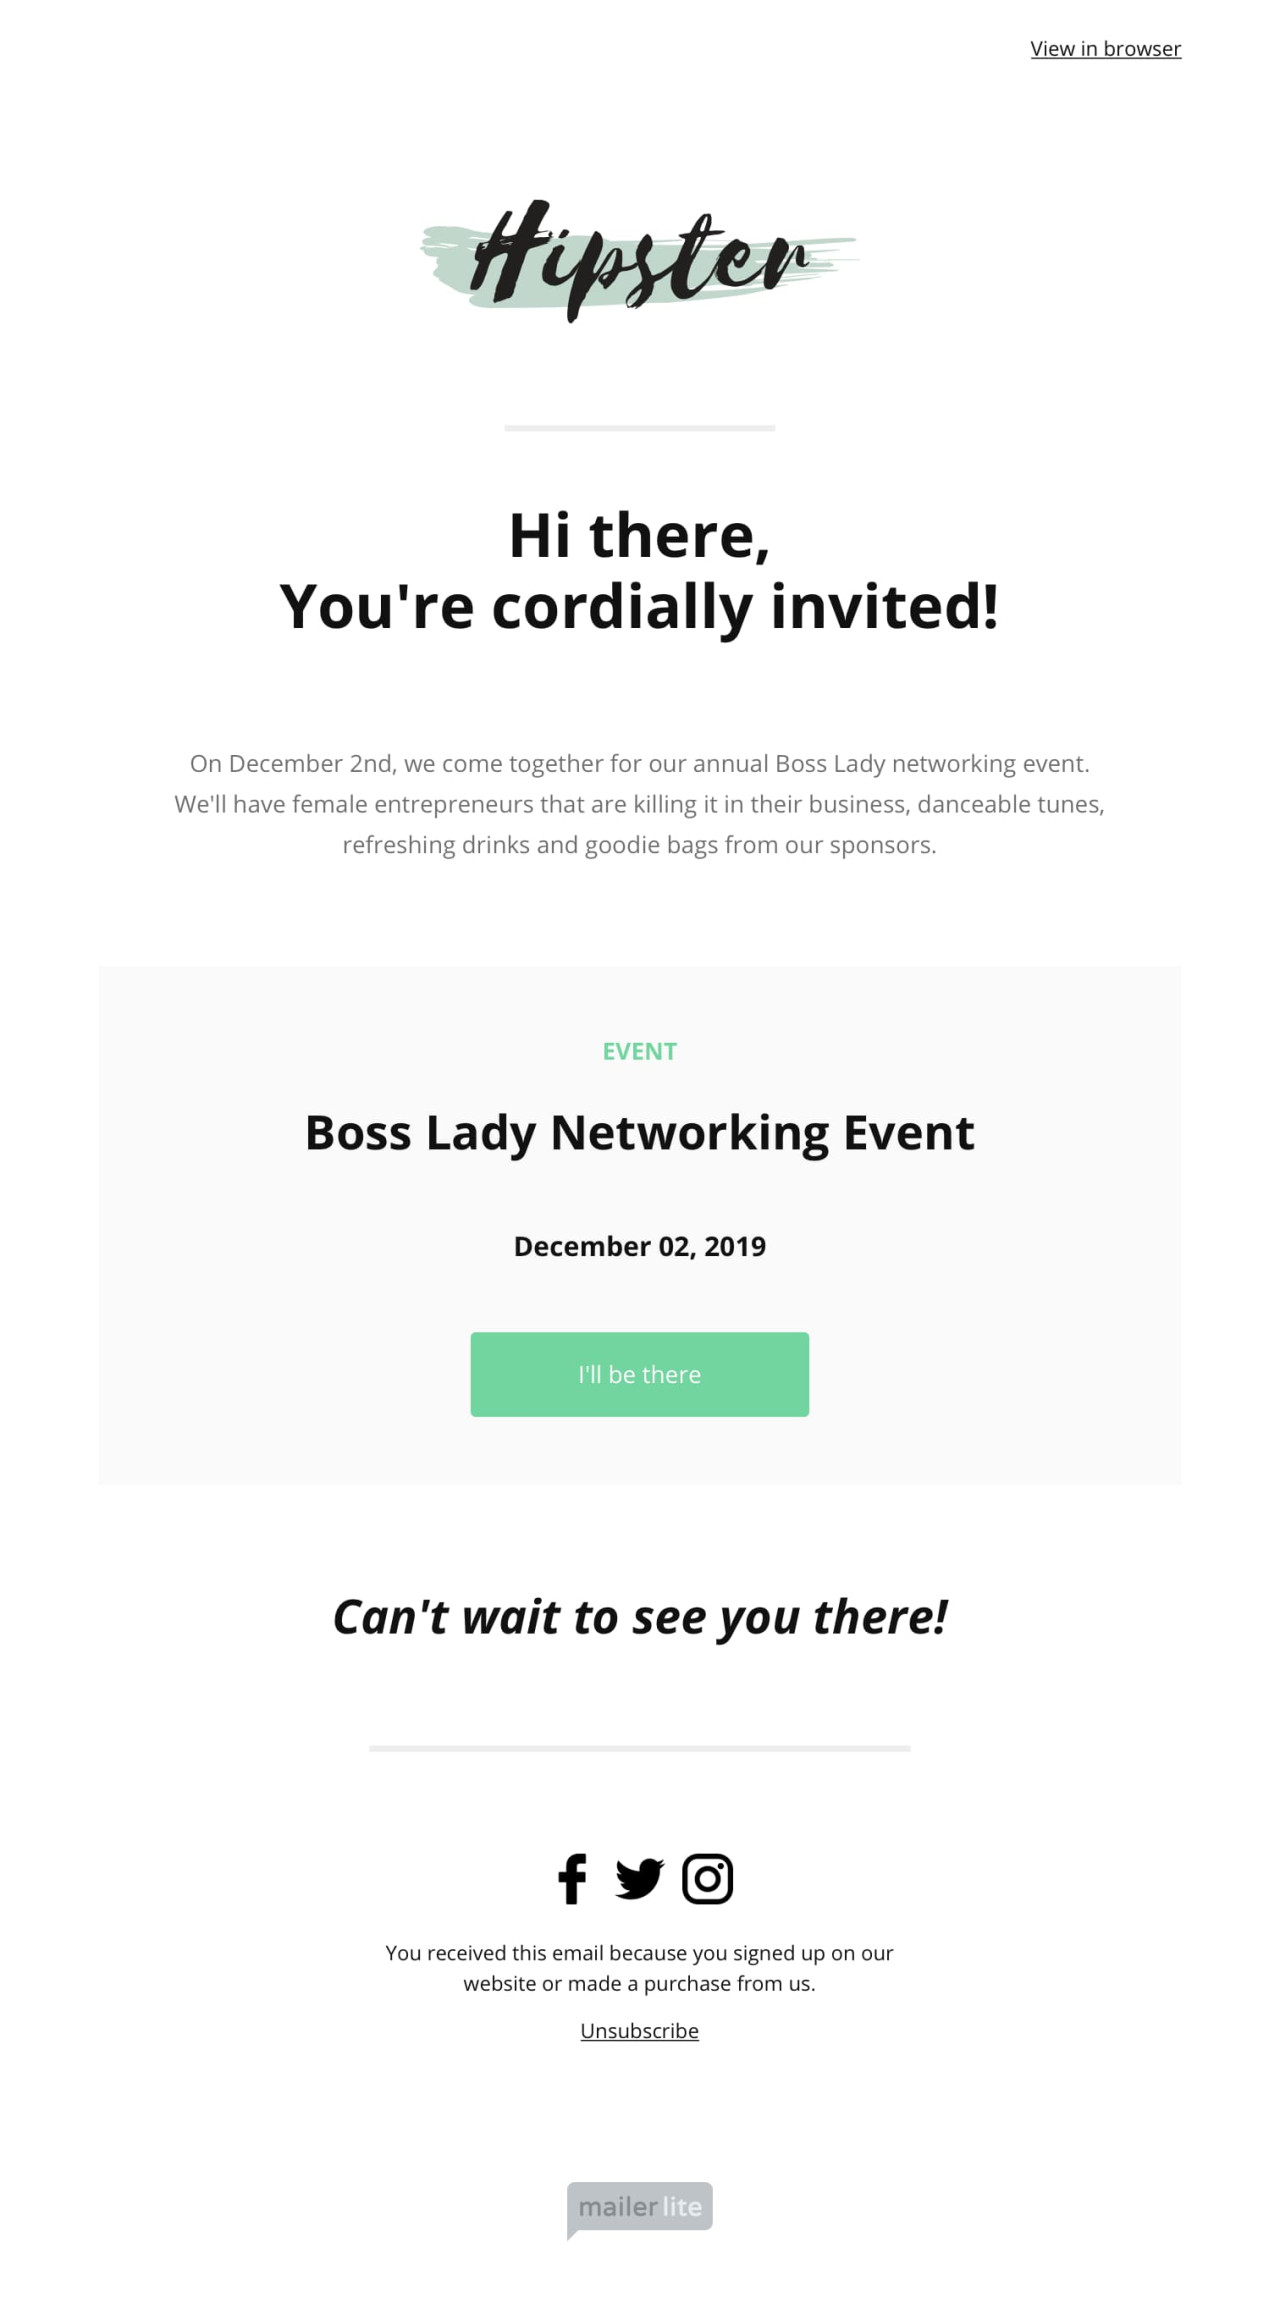 Event announcement template - Made by MailerLite